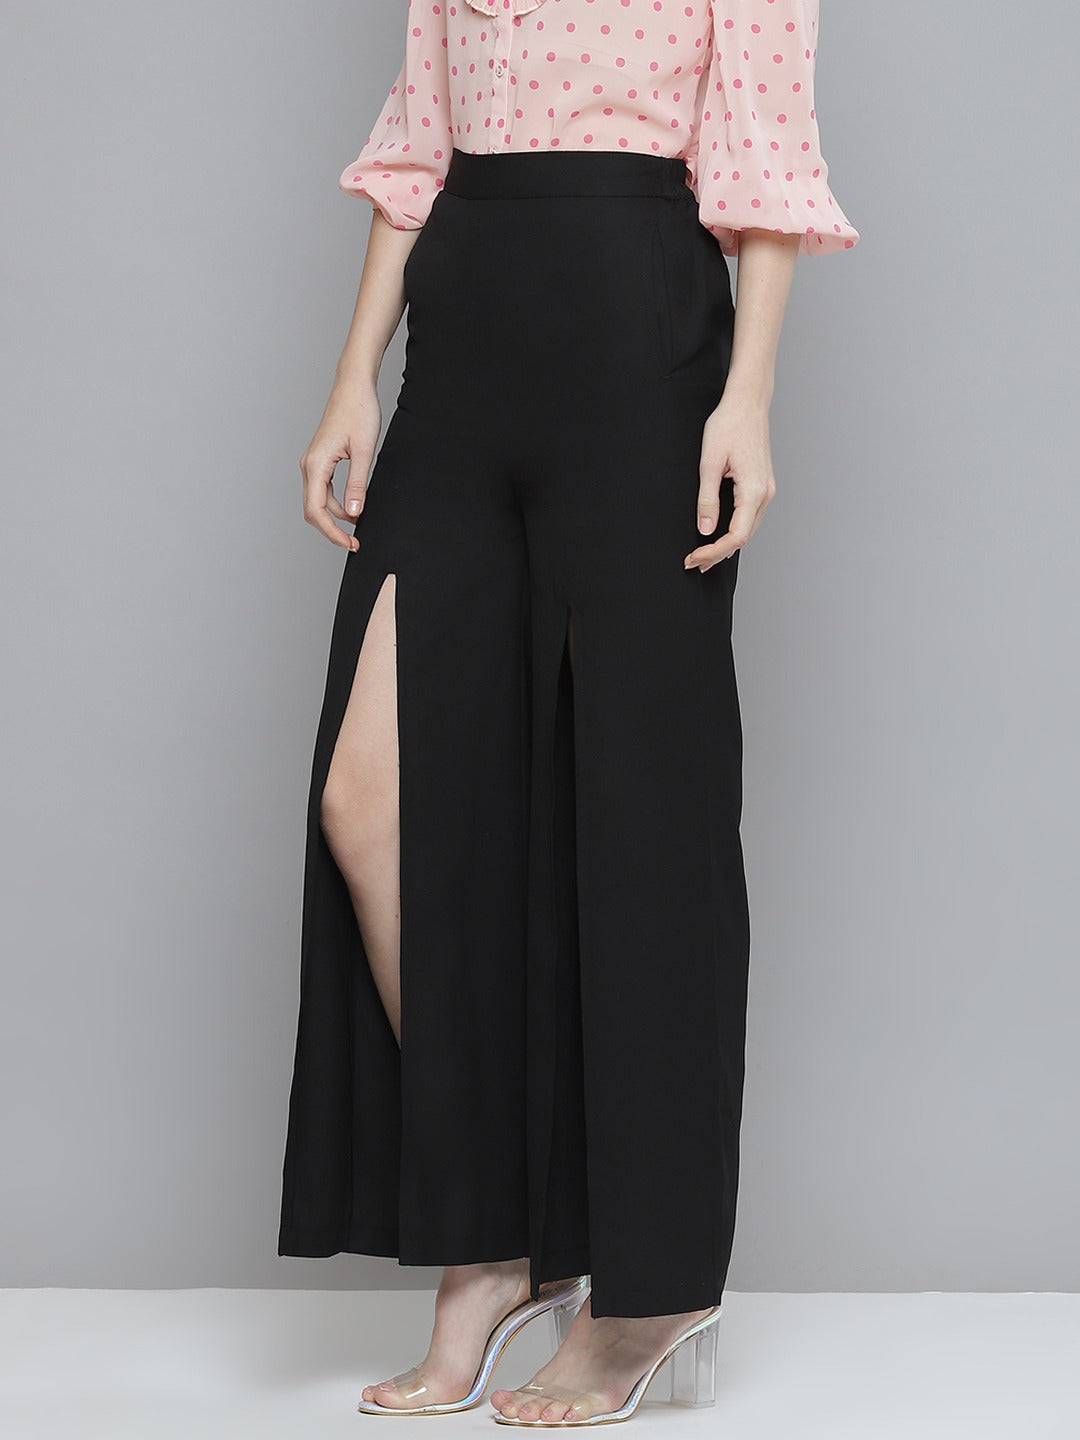 Buy High Waist Trousers, Wide Leg Pants, Red Wide Leg Pants, Palazzo Pants  for Women, Women Pants With Pockets, Office Pants Women, Elegant Pant  Online in India 